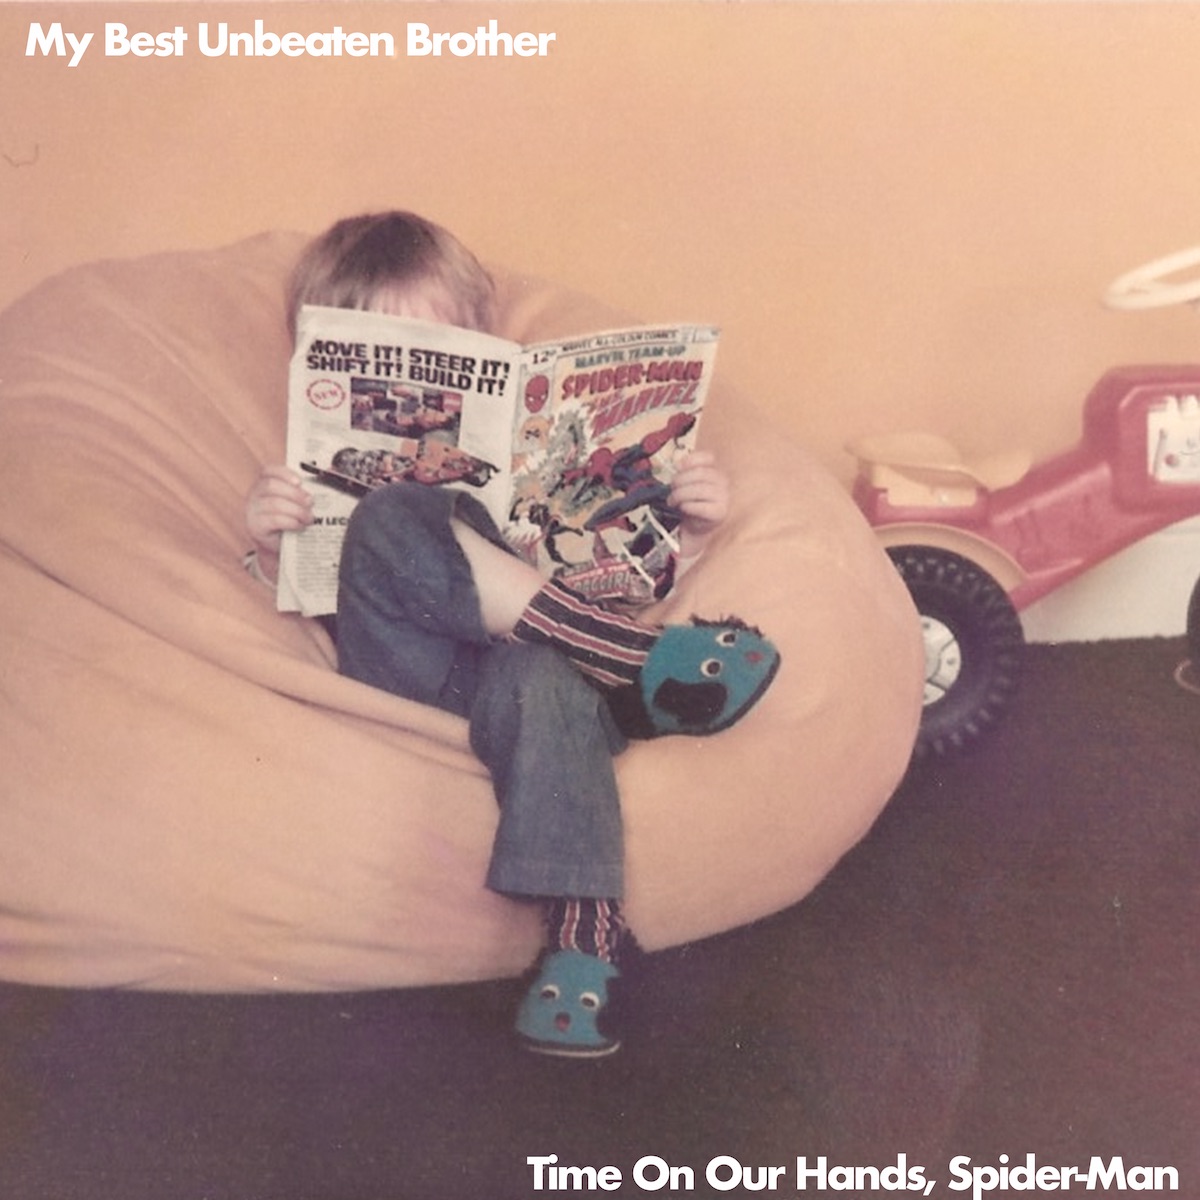 LISTEN: “Time on Our Hands, Spider-Man” by My Best Unbeaten Brother